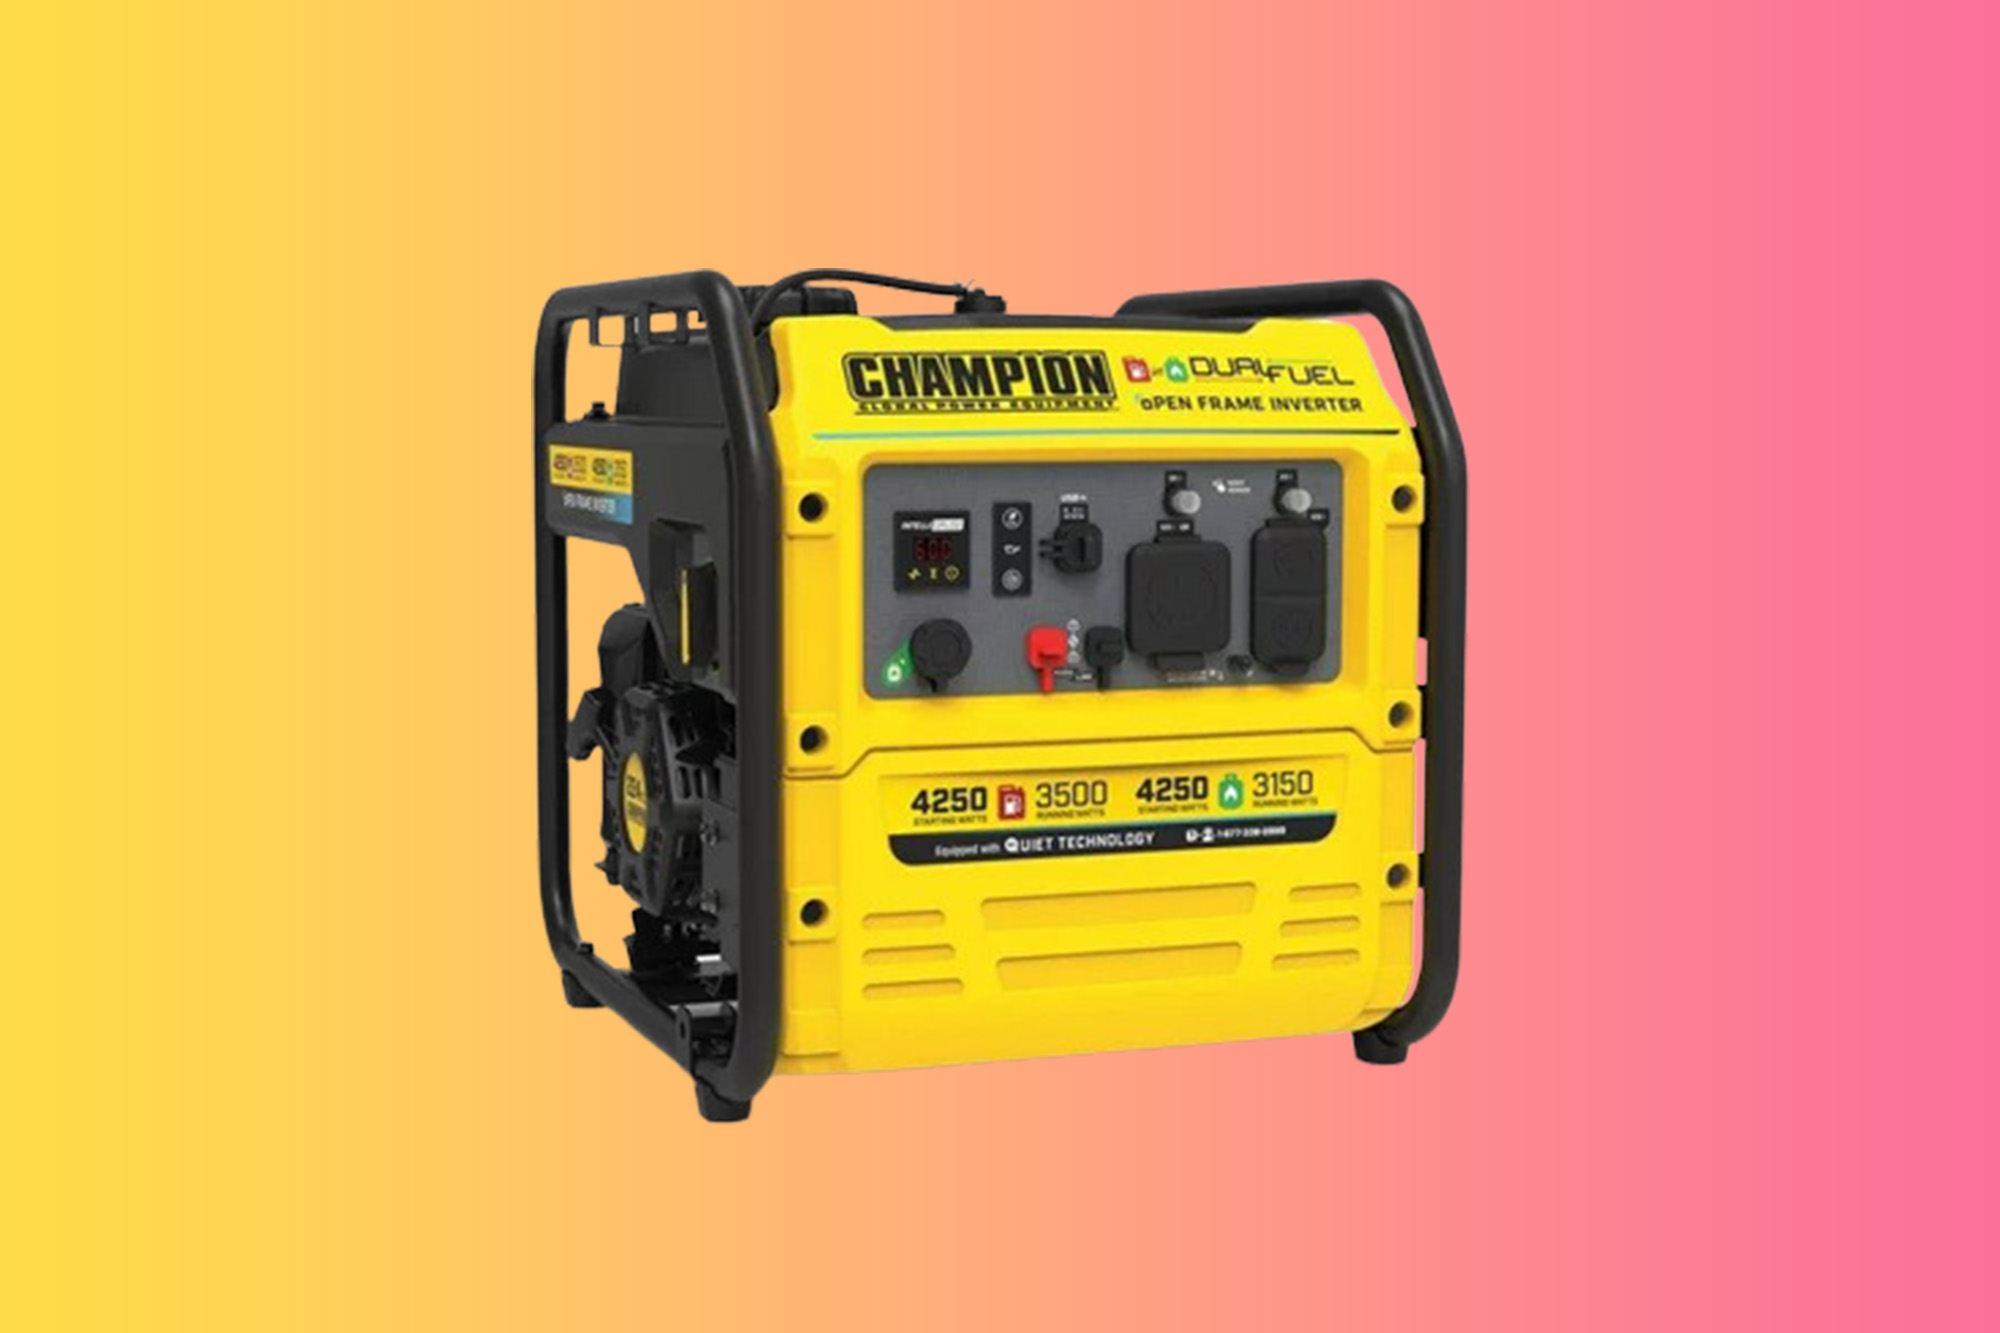 Save $200 on this EPA-certified duel-fuel generator at Walmart